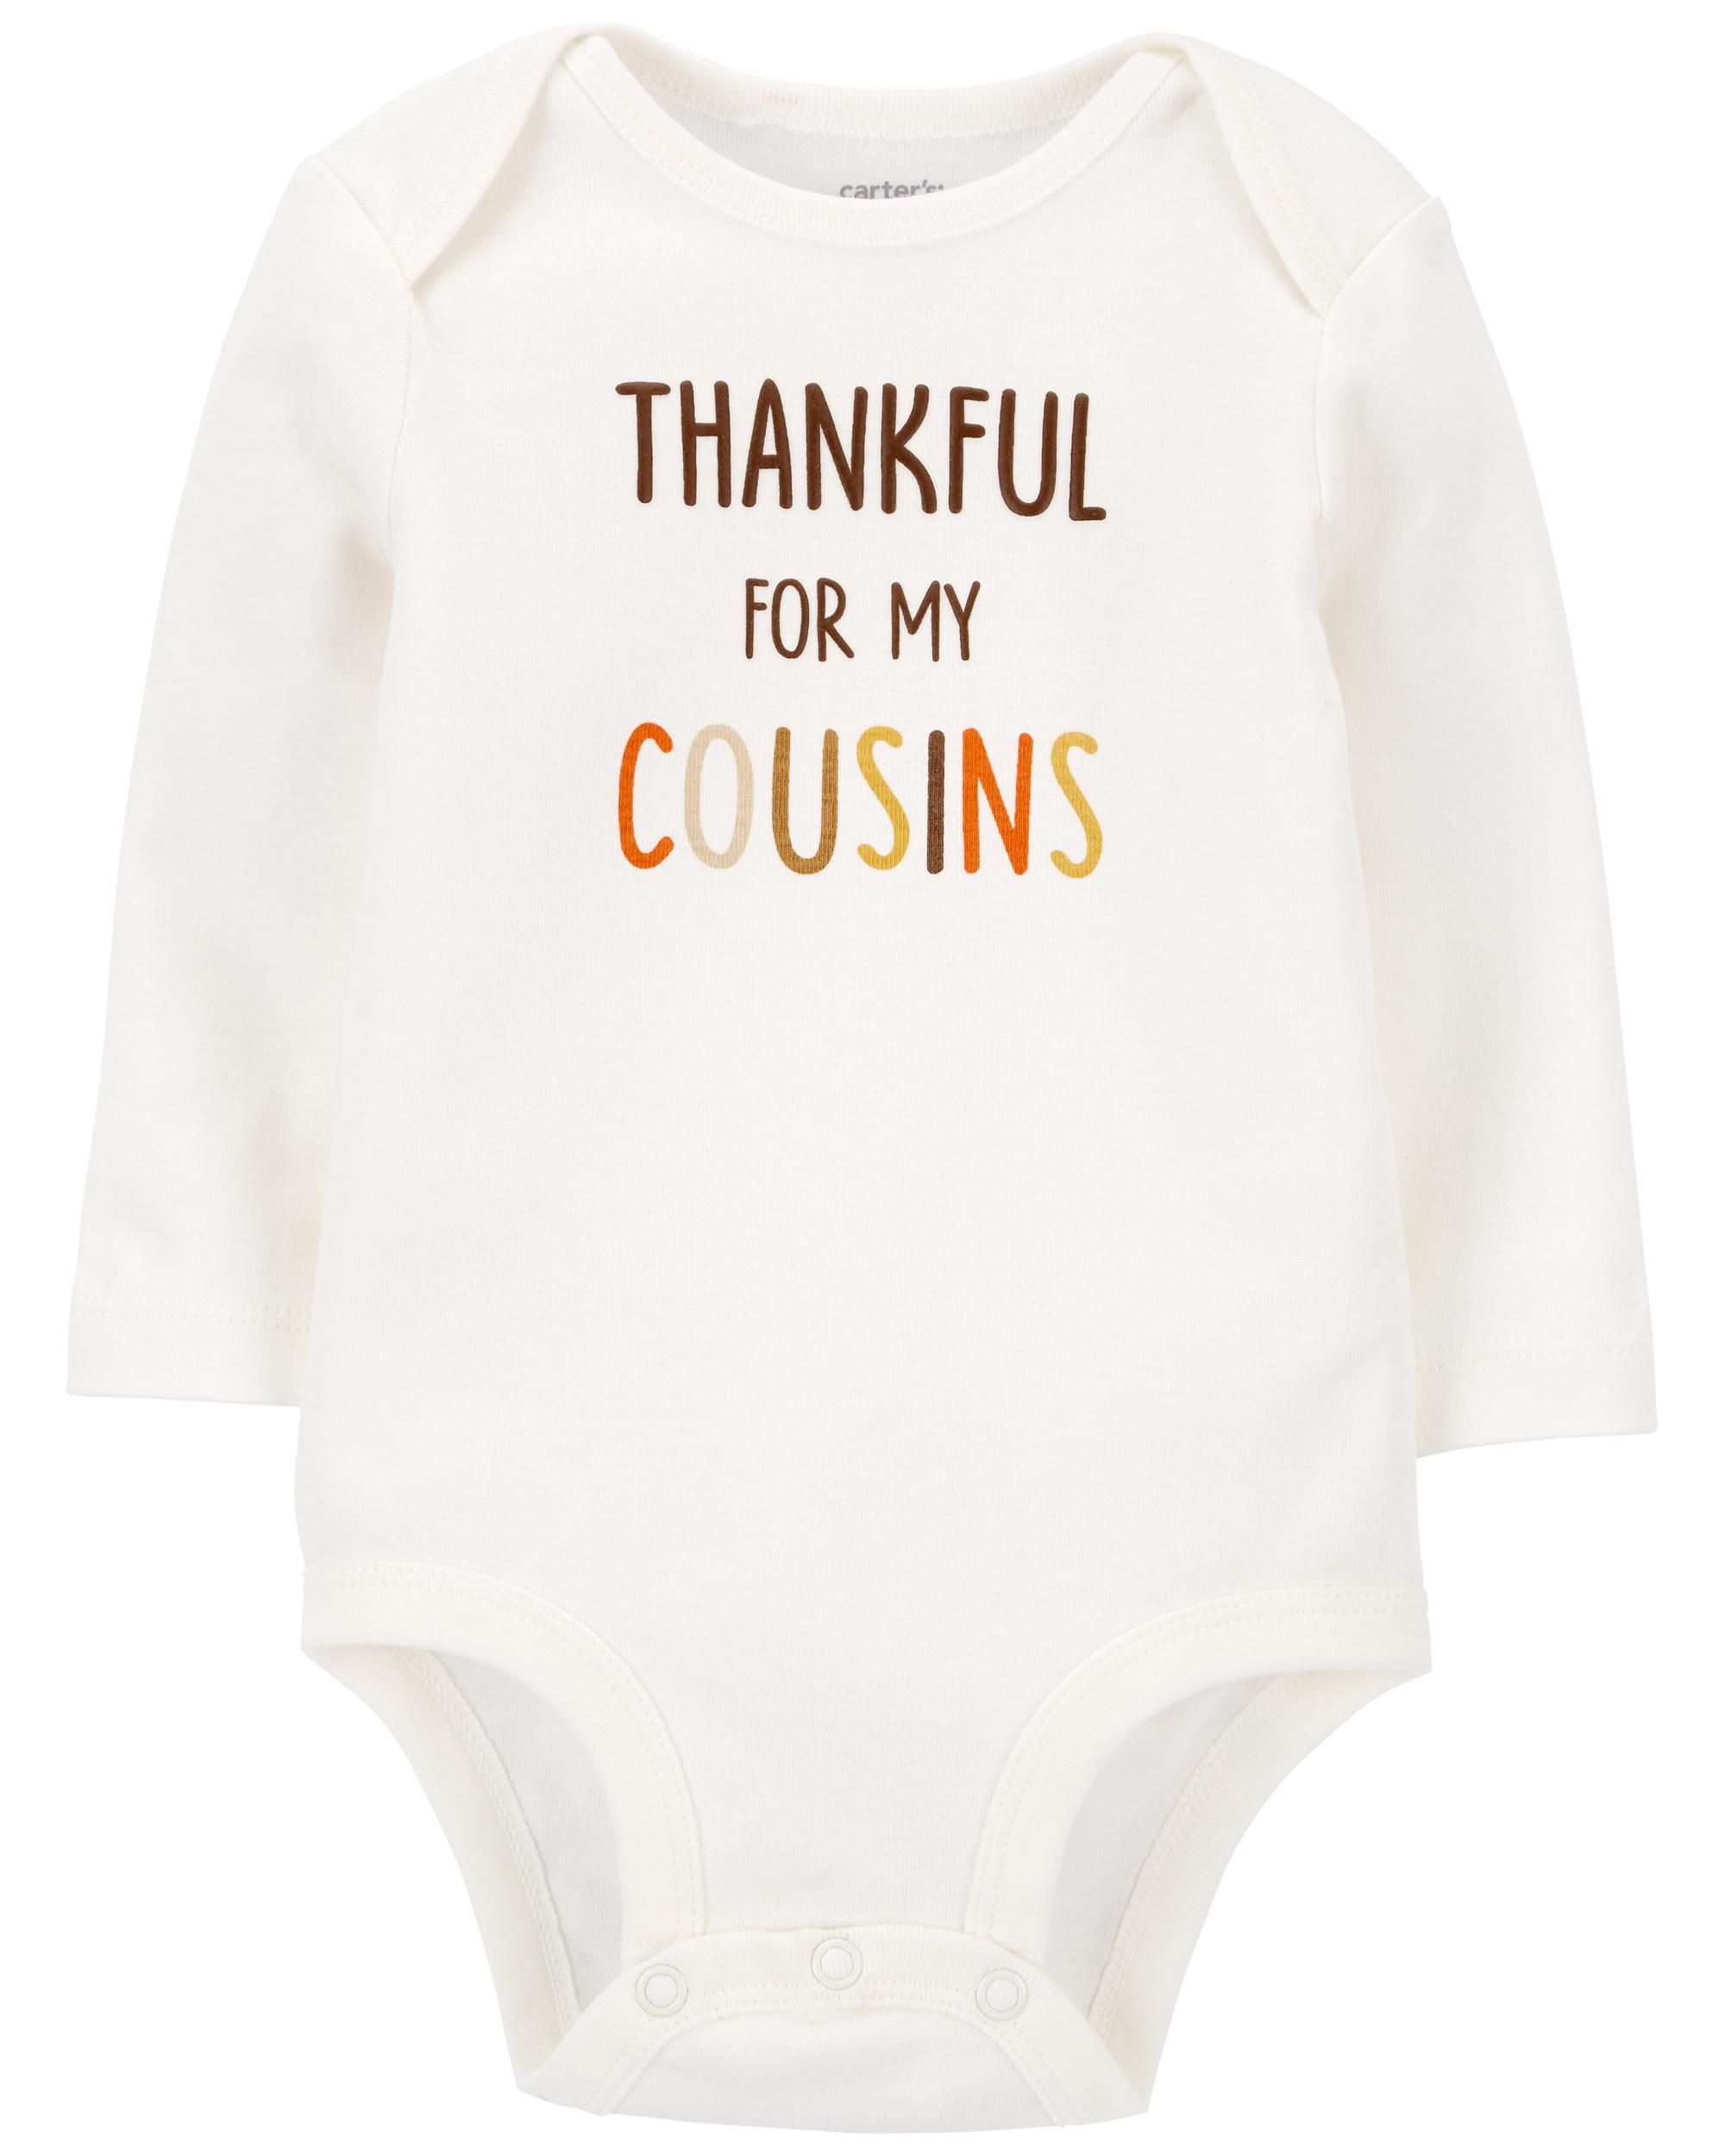 Thankful For My Cousins Collectible Bodysuit | Carter's